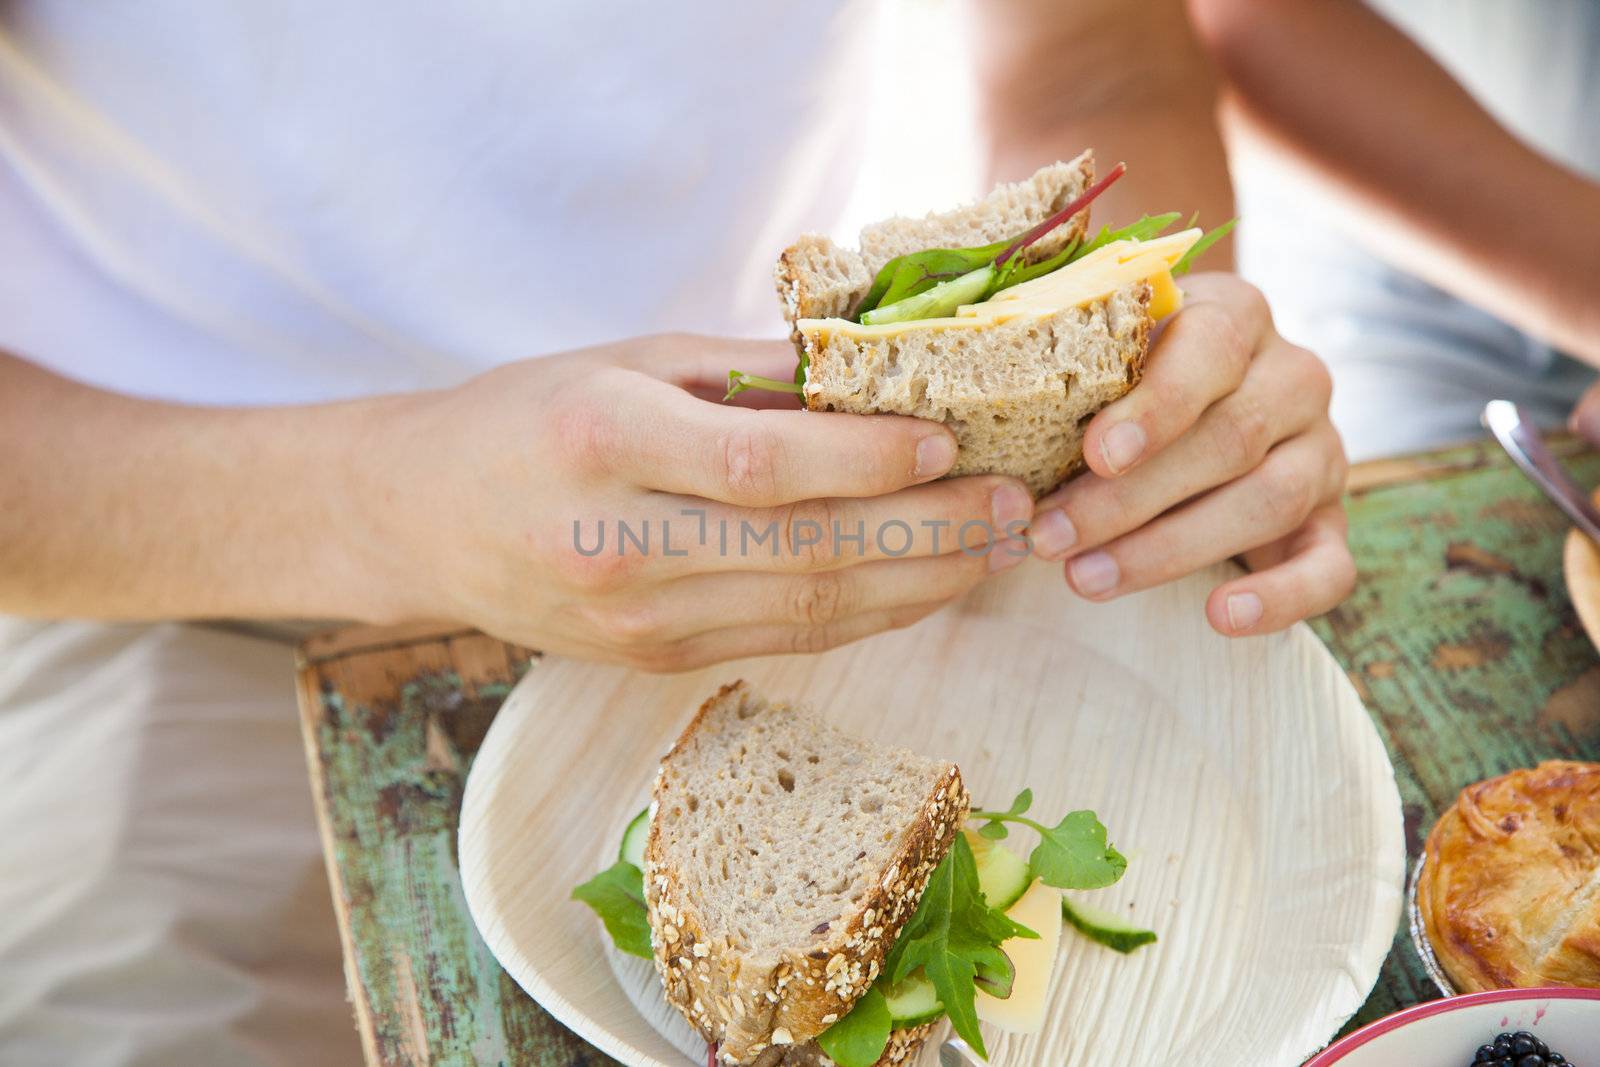 Closeup of male hands holding a healthy sandwich with cheese and lettuce